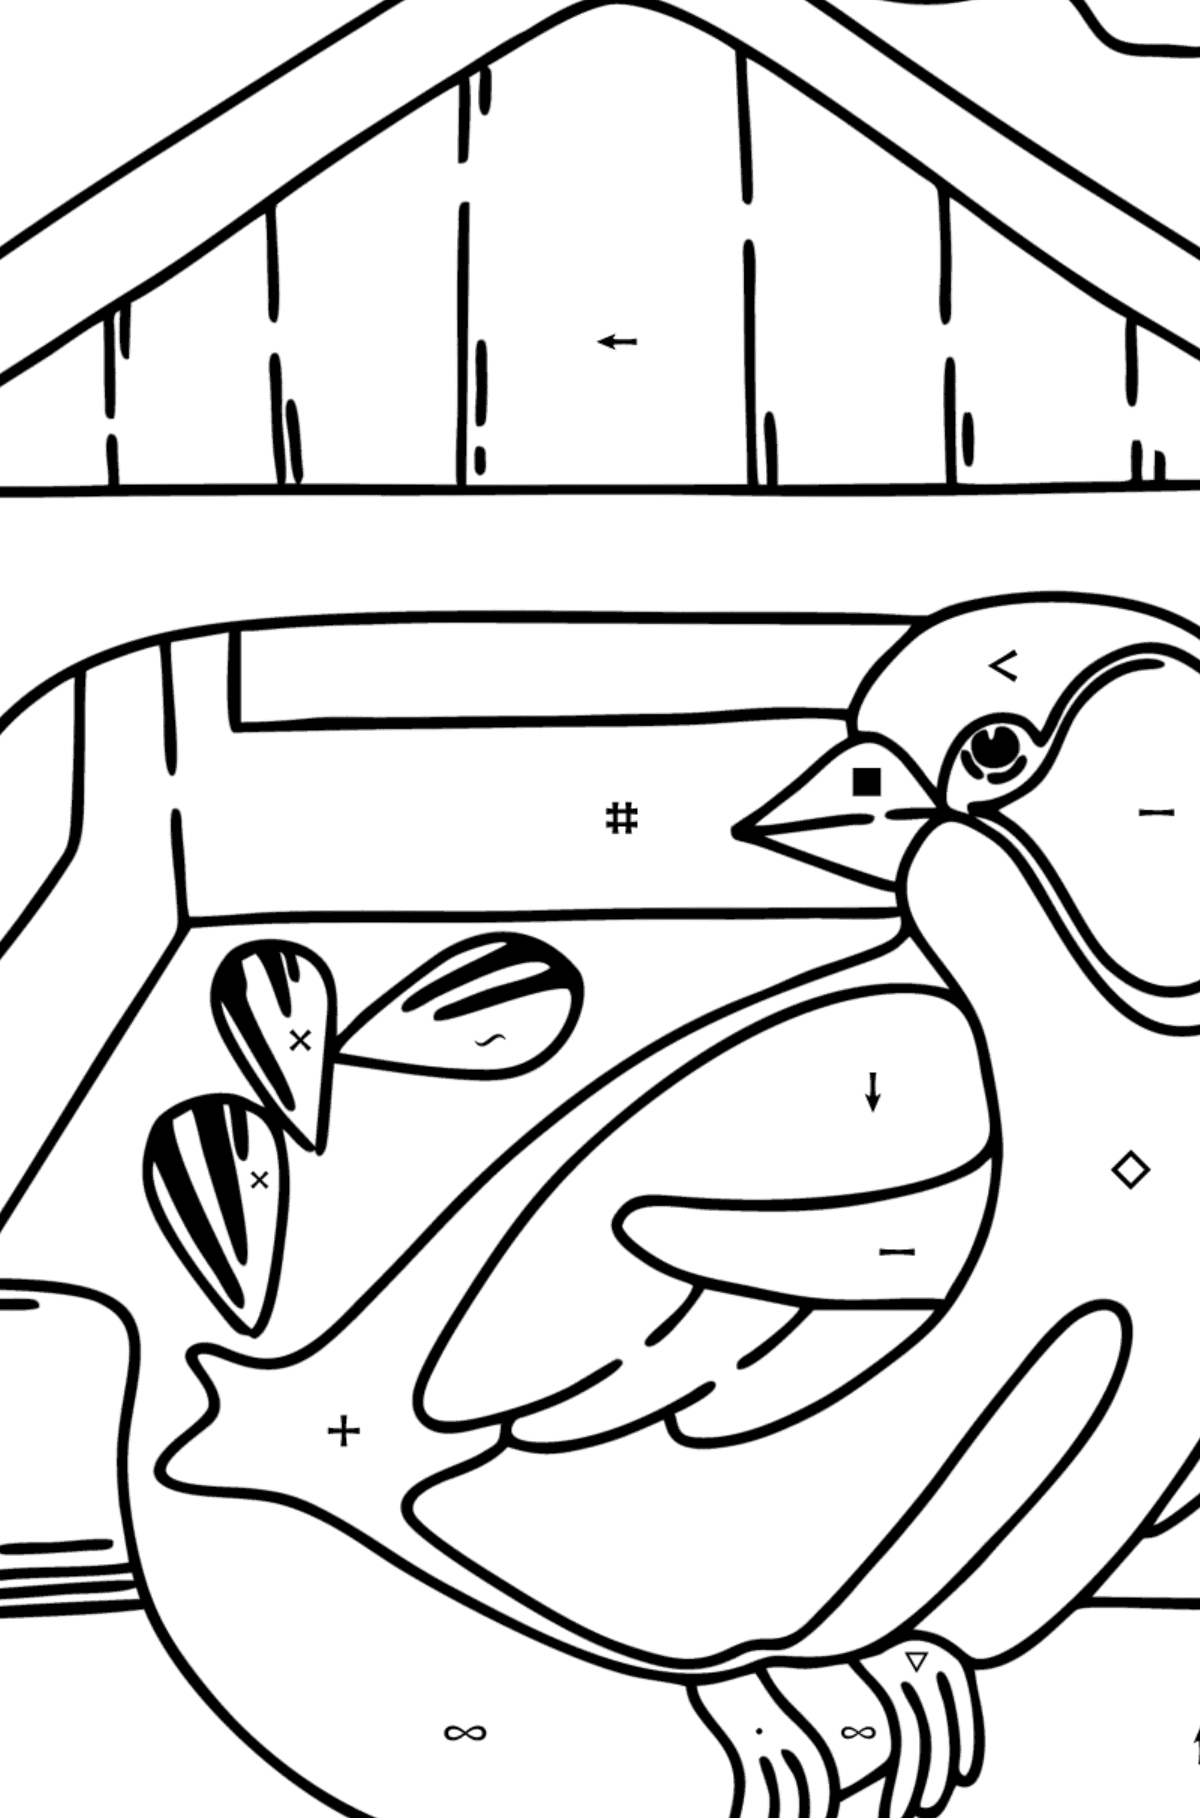 Coloring page - Bird feeder - Coloring by Symbols for Kids